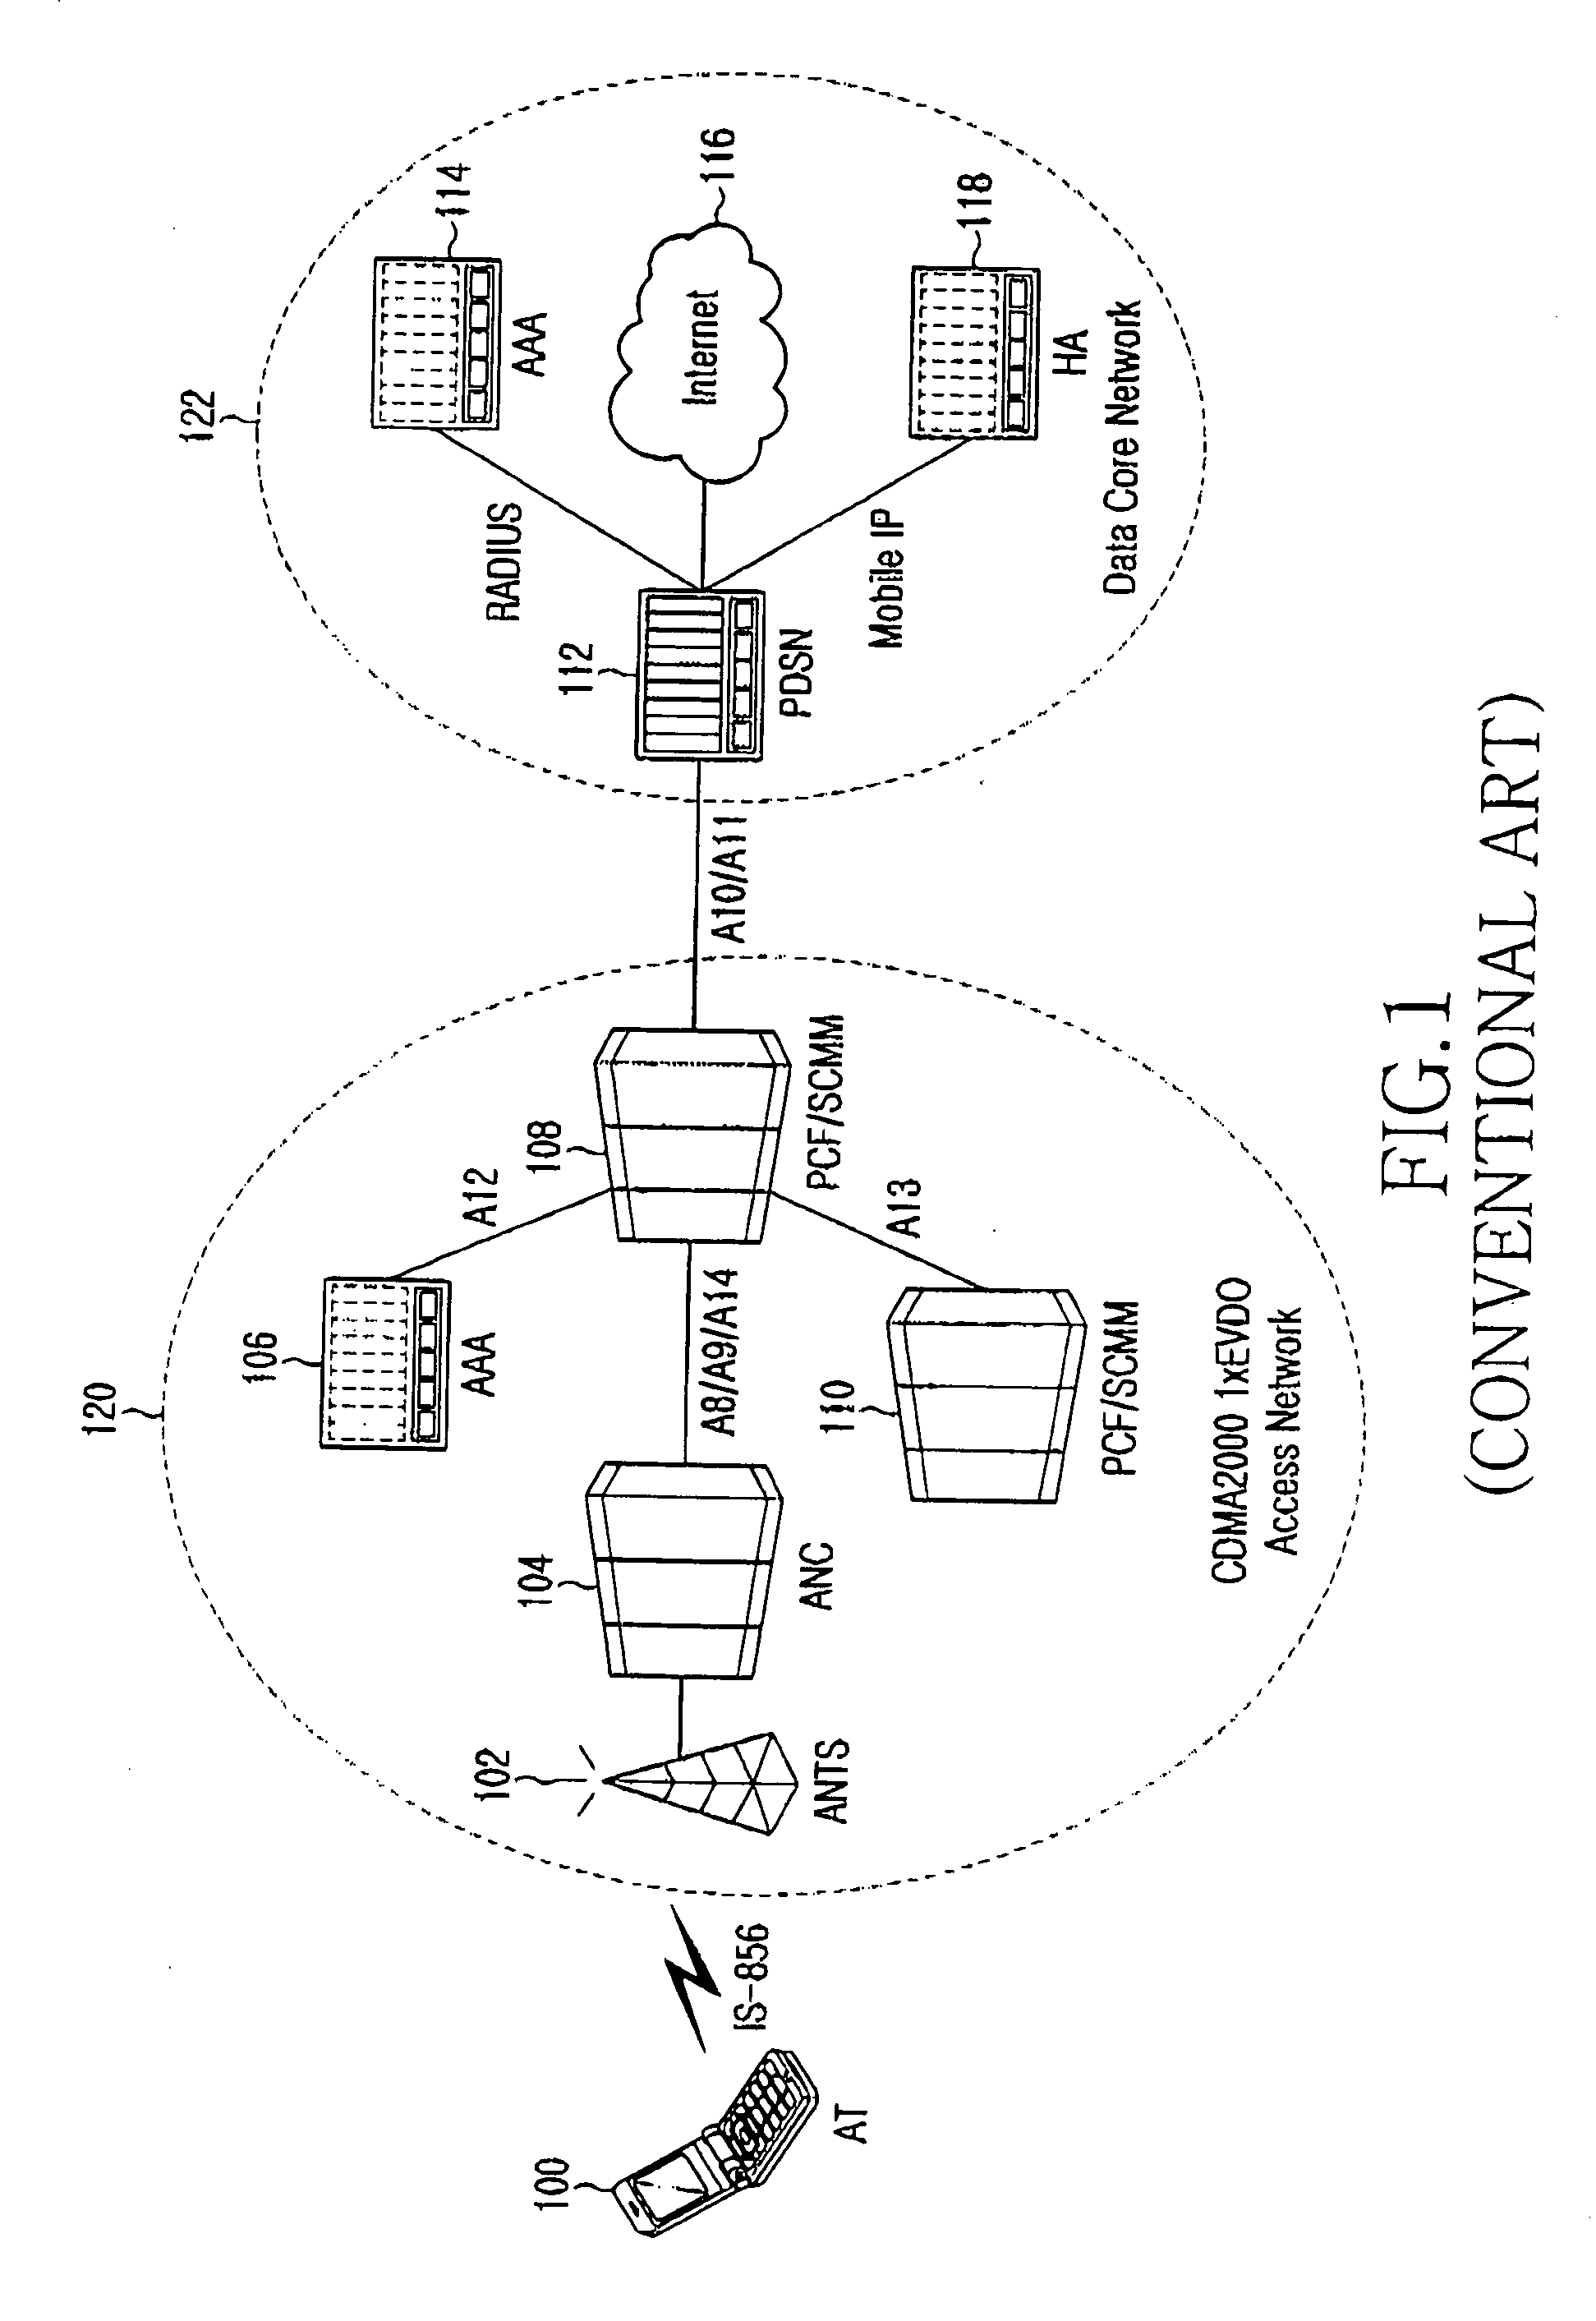 System and method for interworking between cellular network and wireless LAN